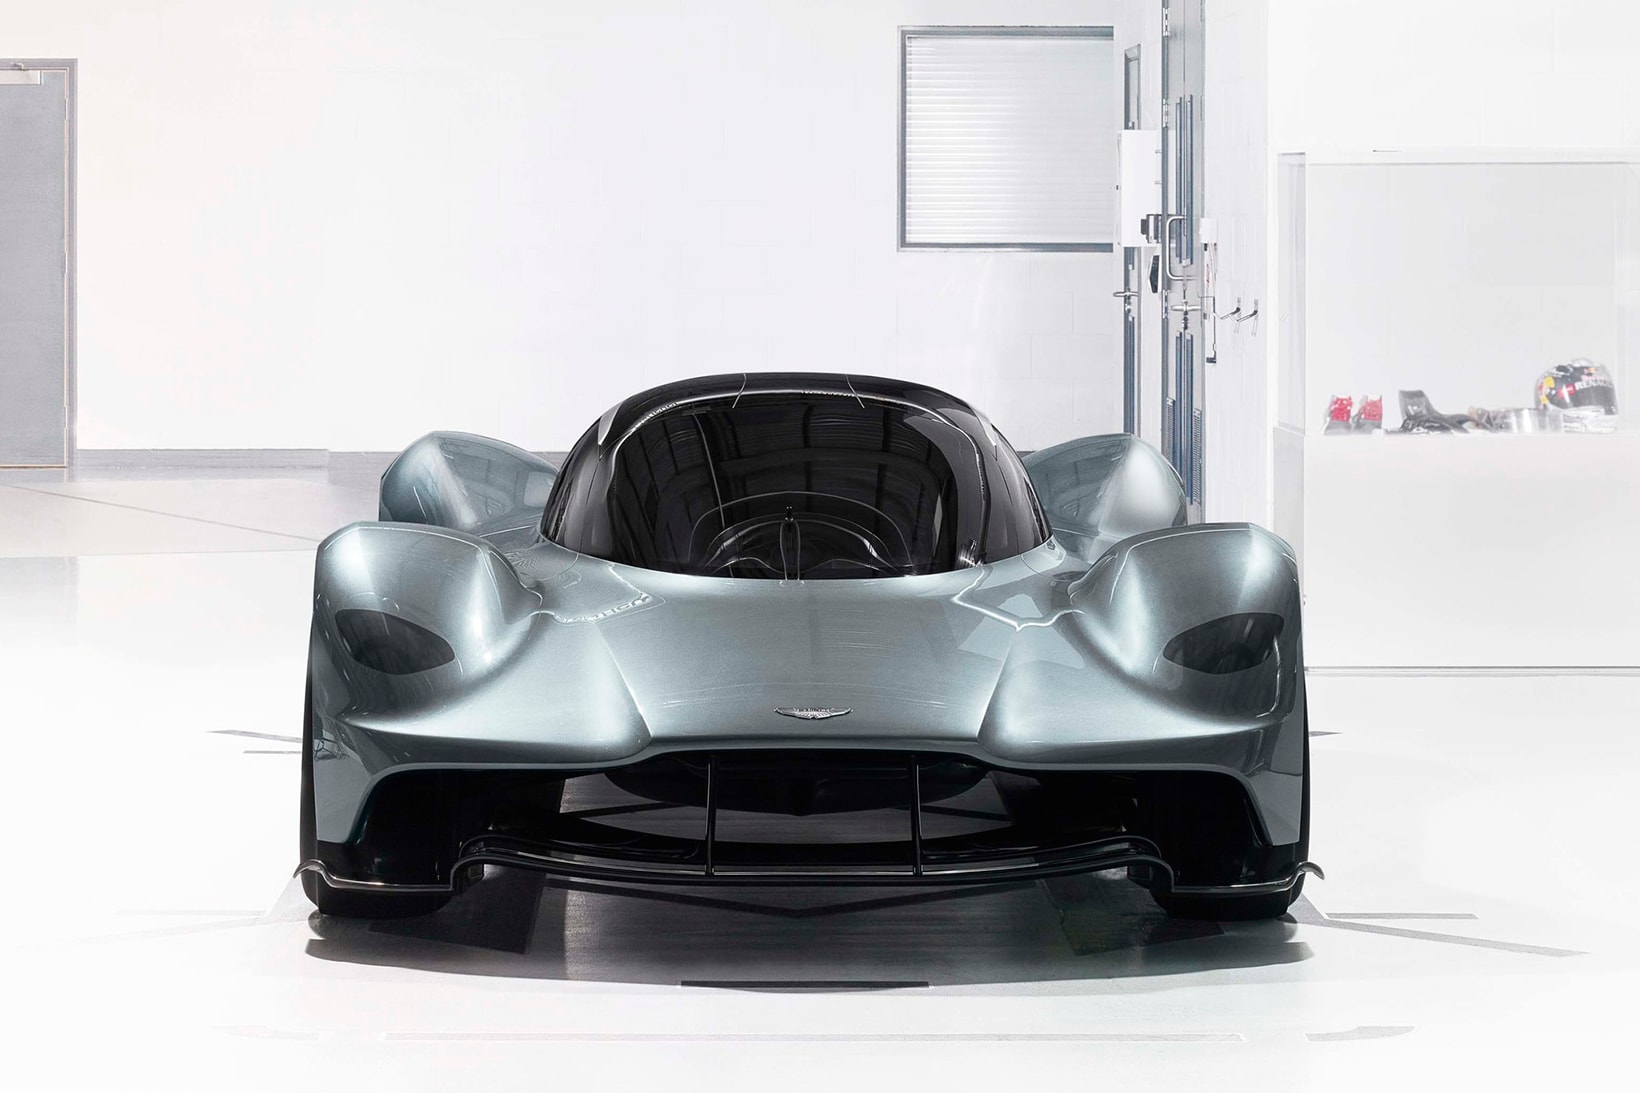 Aston Martin Red Bull Racing AM-RB 001 pictures in garage